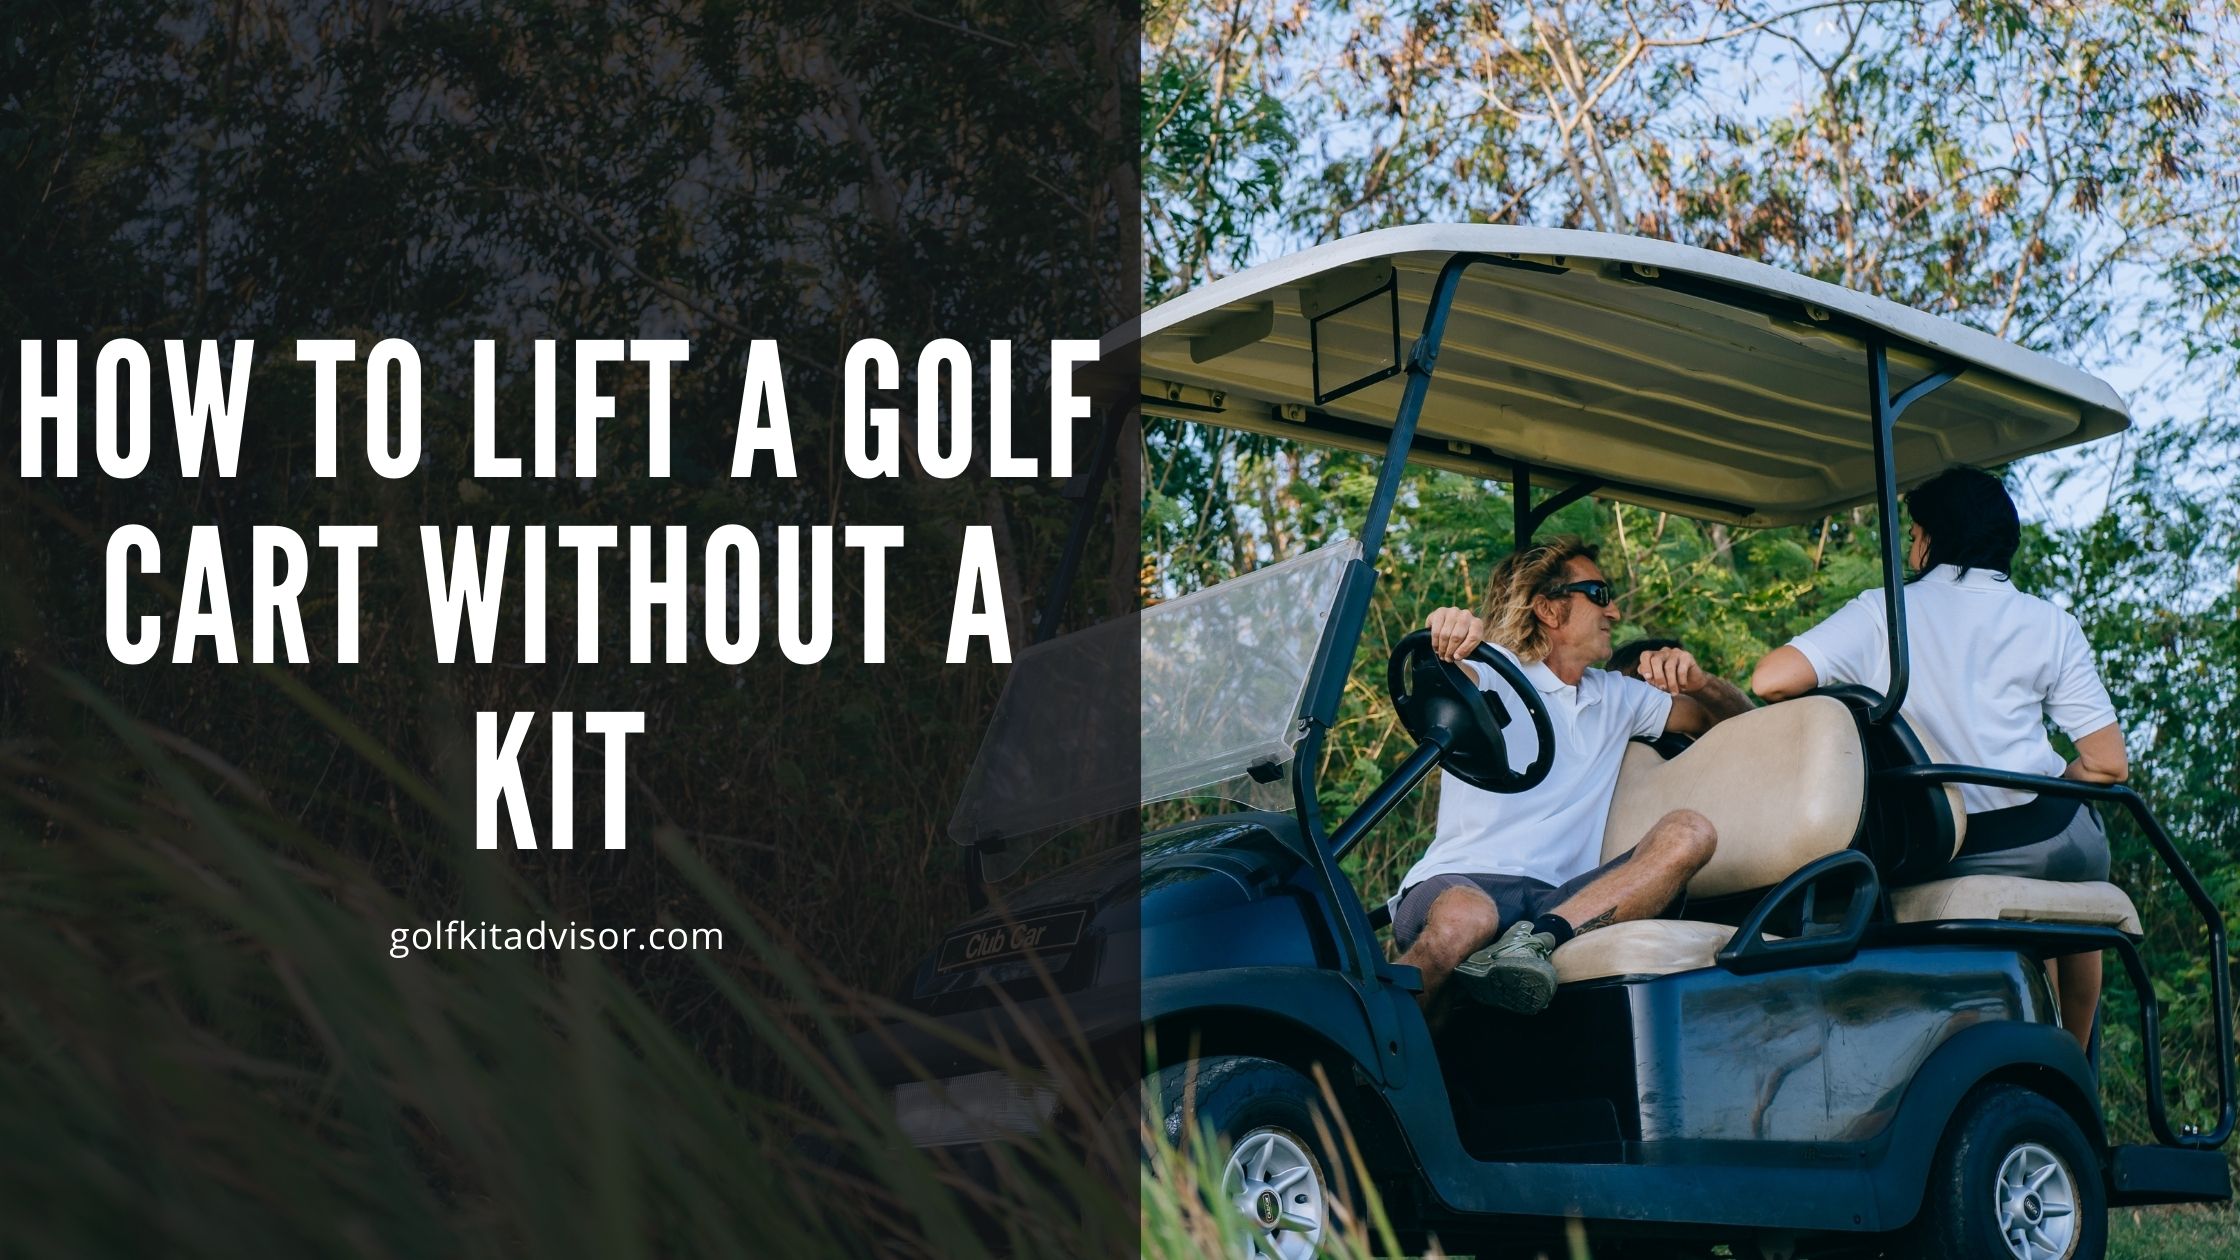 How to Lift a Golf Cart Without a Kit